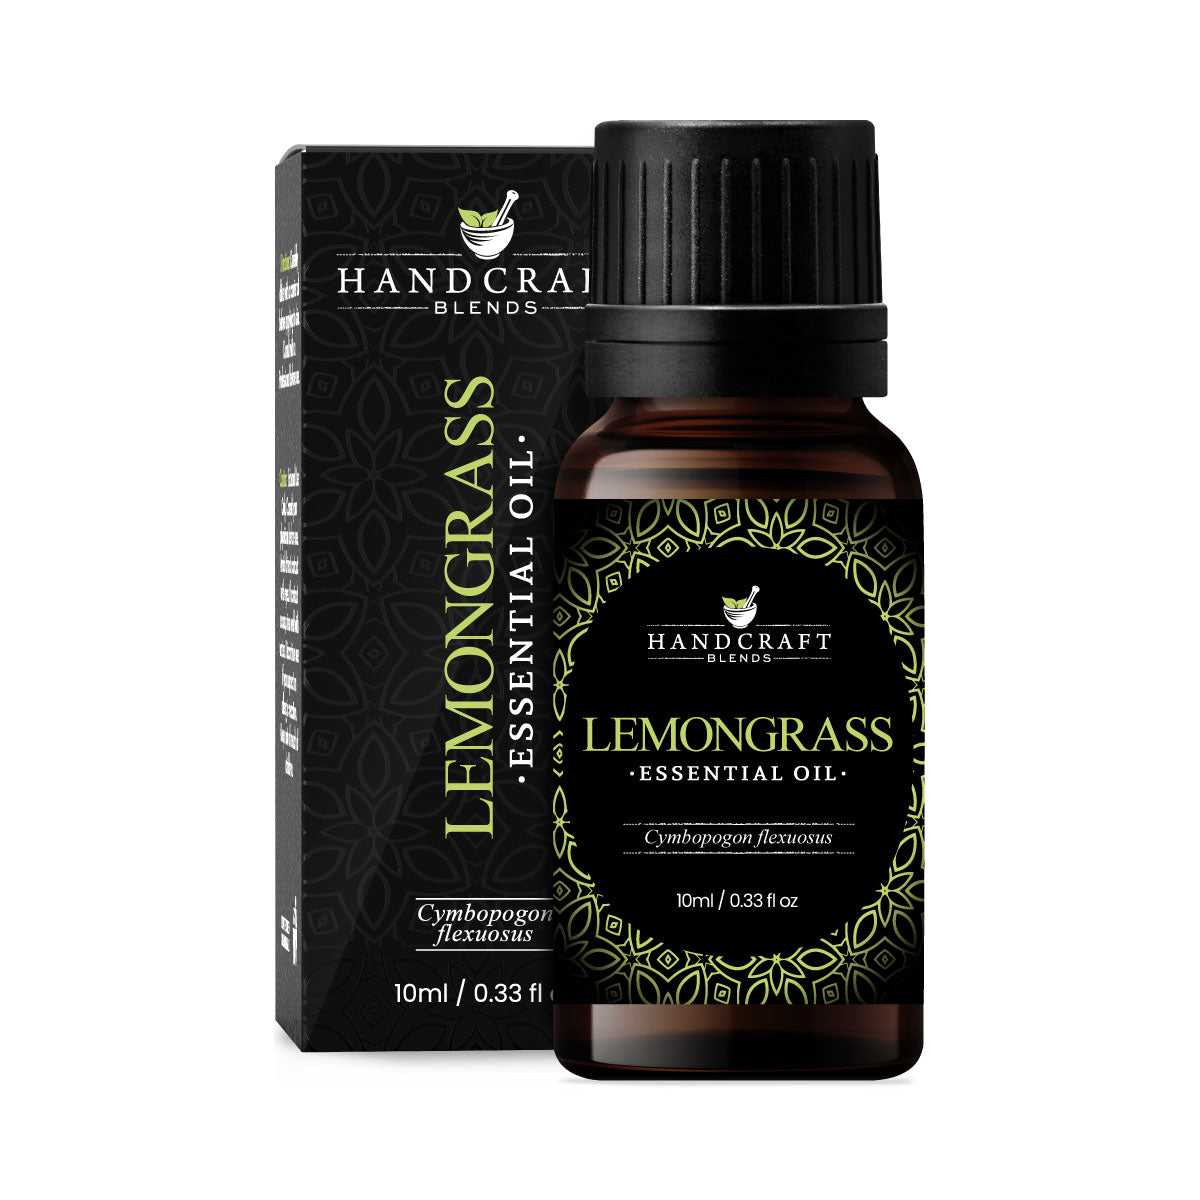 Handcraft Blends Lemongrass Essential Oil - 100% Pure and Natural - Premium Therapeutic Grade with Premium Glass Dropper - Huge 4 fl. oz